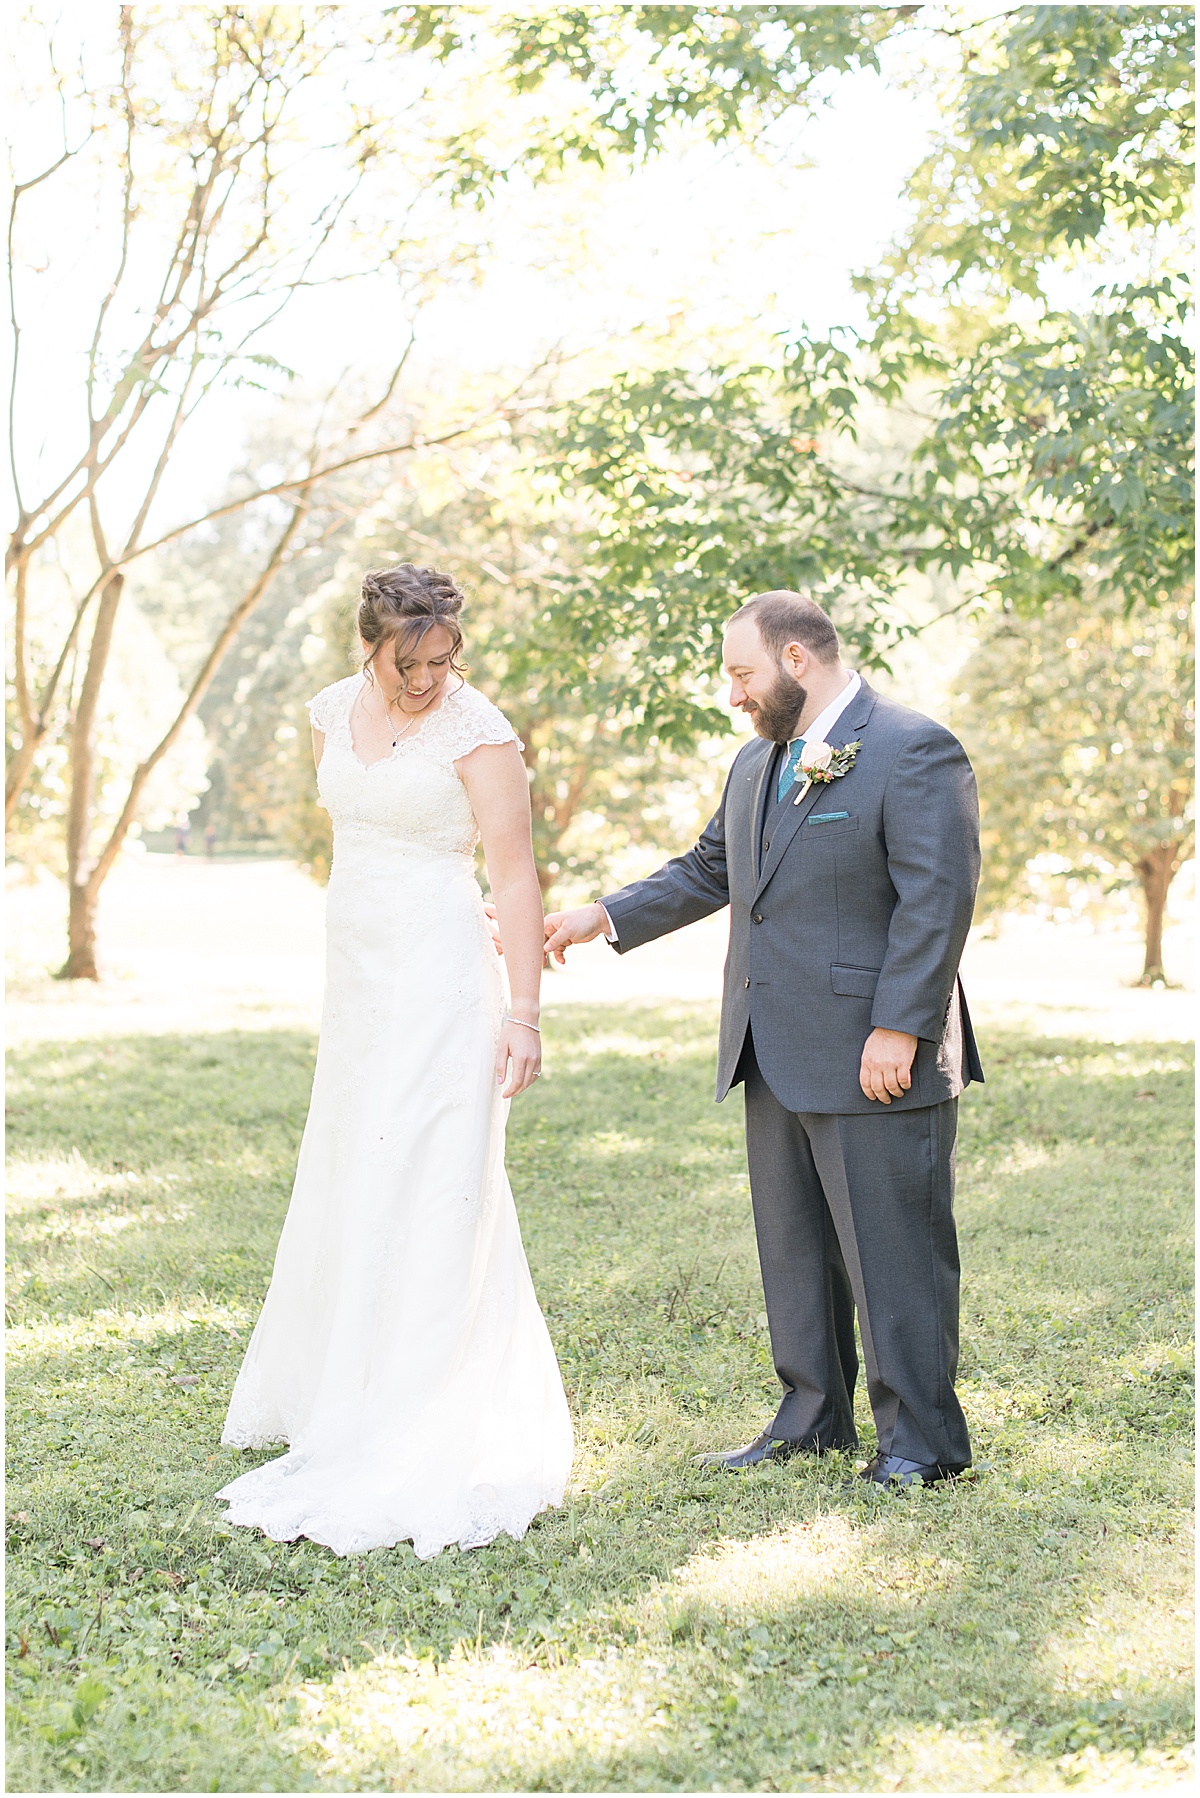 First look in intimate wedding at Holliday Park in Indianapolis